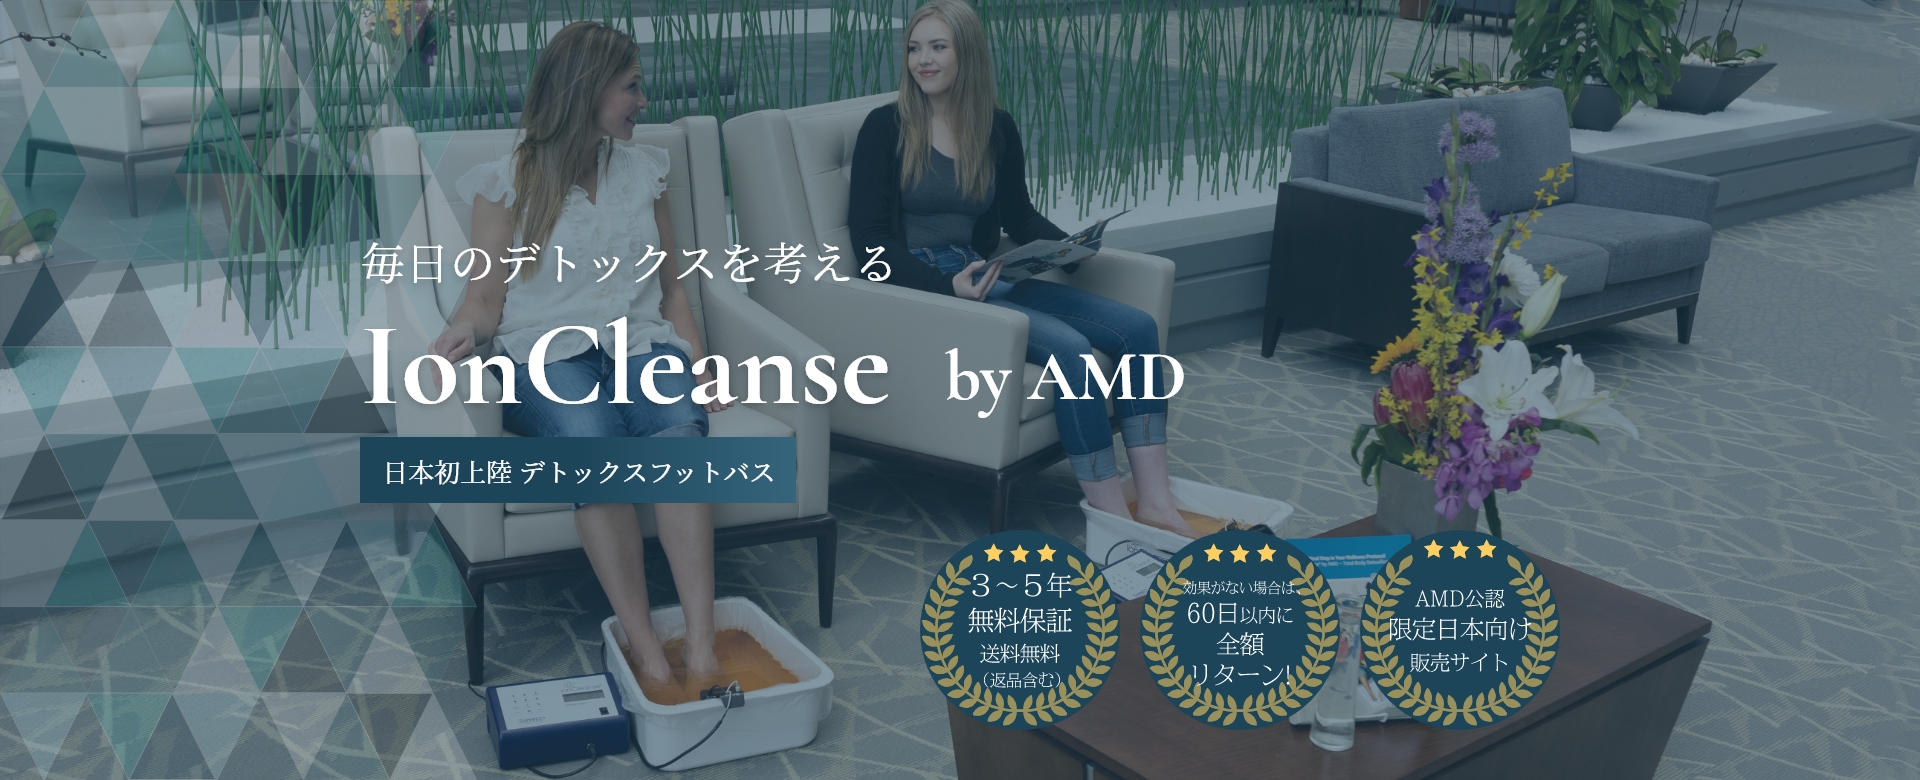 IonCleanse